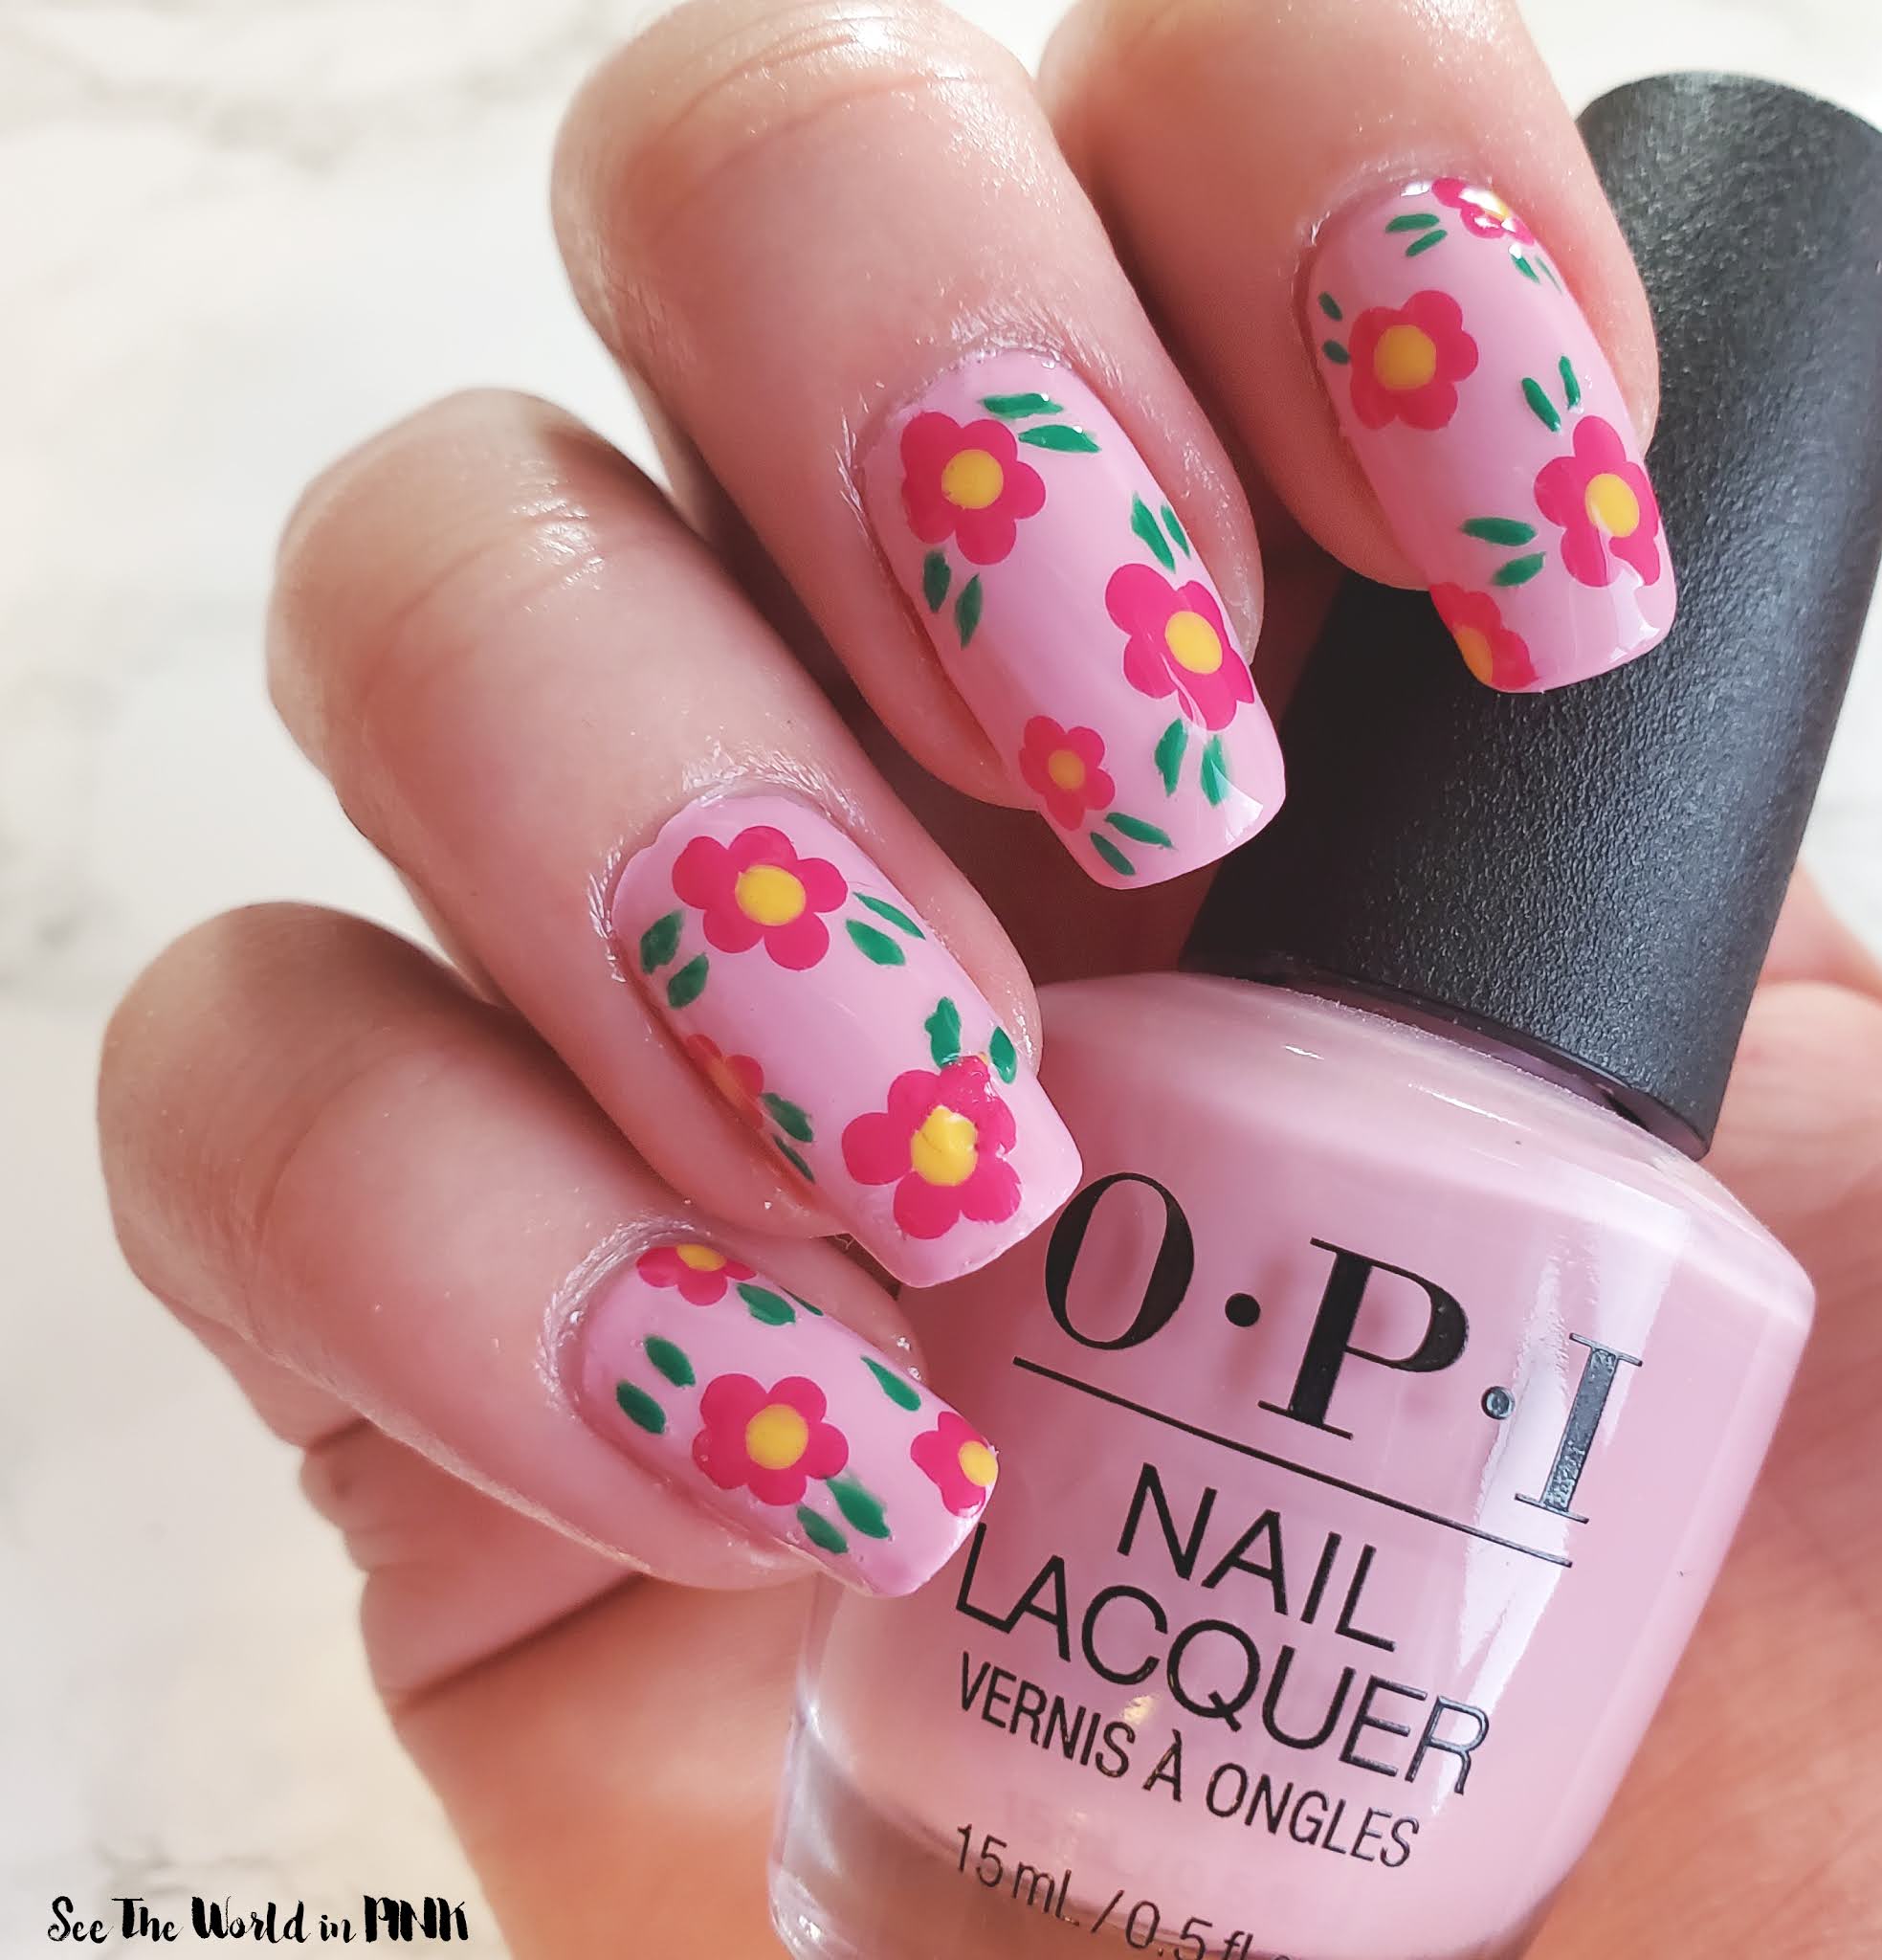 Manicure Monday - Pink Spring Dotted Floral Nail Art